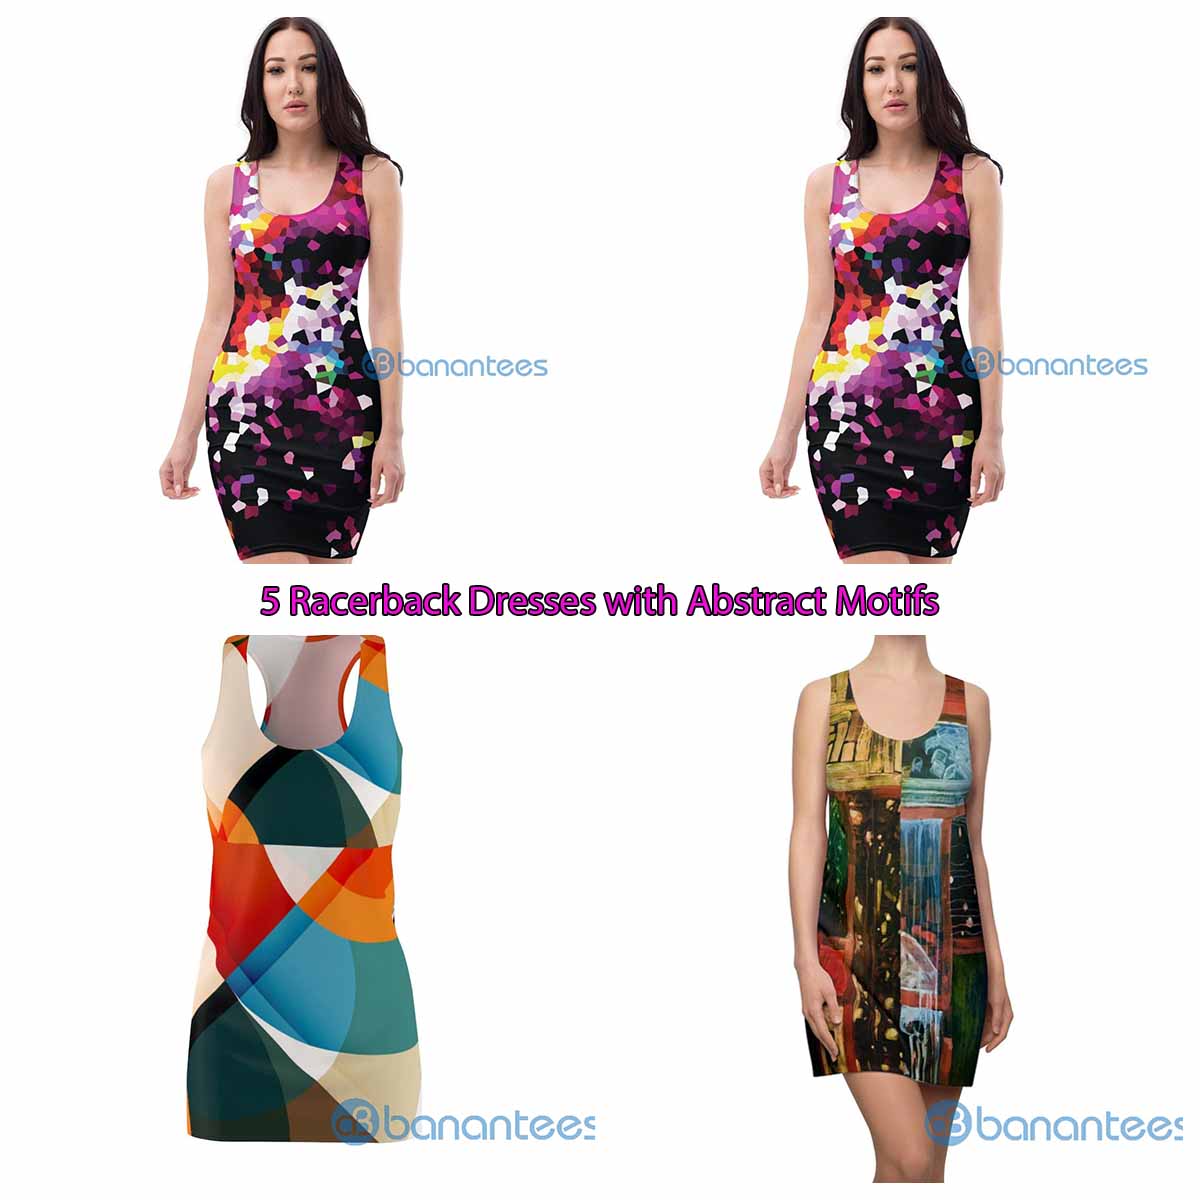 5 Racerback Dresses with Abstract Motifs